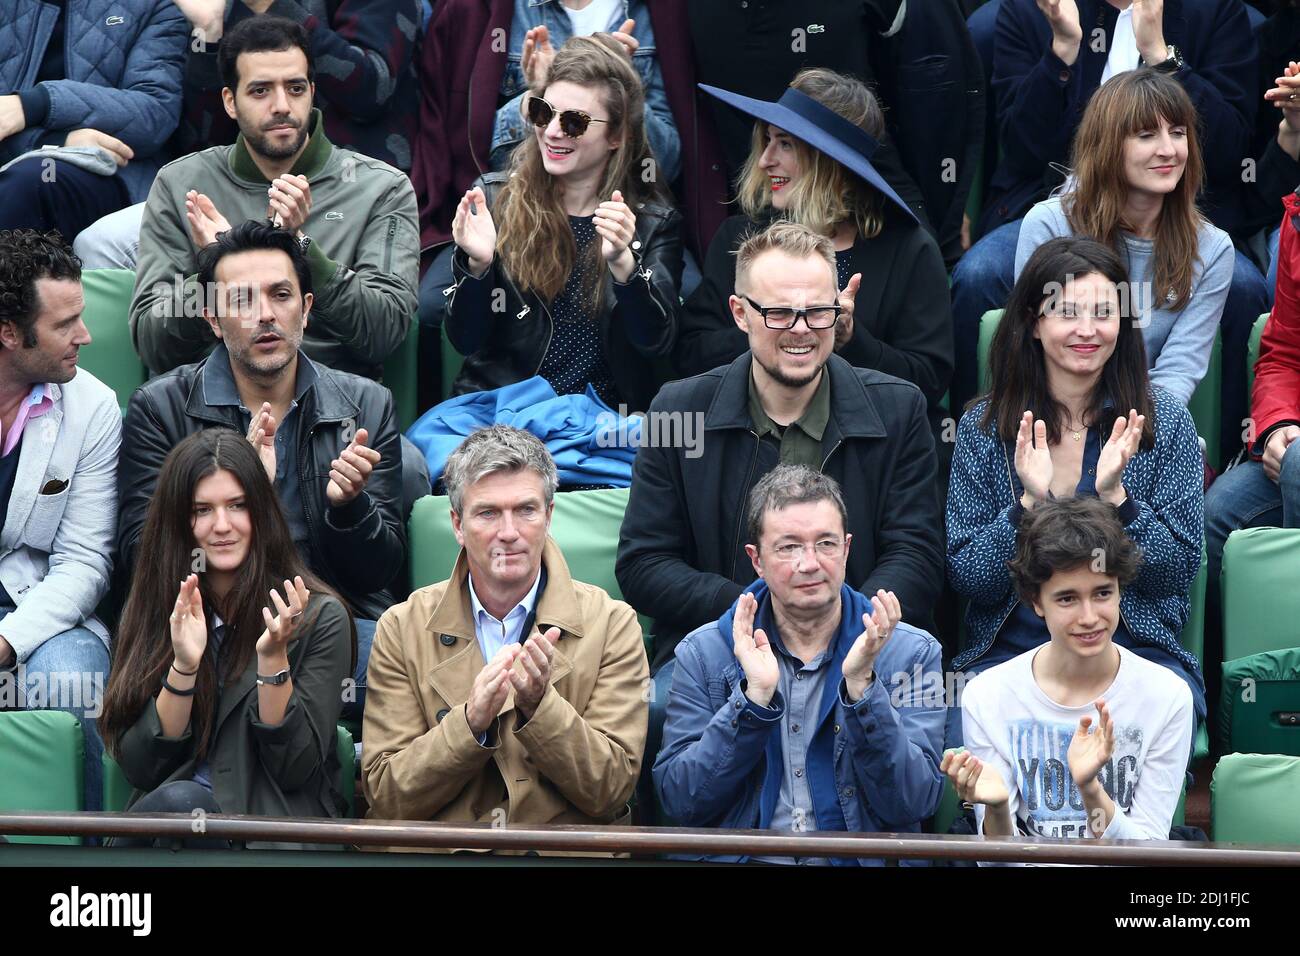 Philippe Caroit and his daughter, Frederic Bouraly in the VIP Tribune during French Tennis Open at Roland-Garros arena in Paris, France on May 29, 2016. Photo by ABACAPRESS.COM Stock Photo